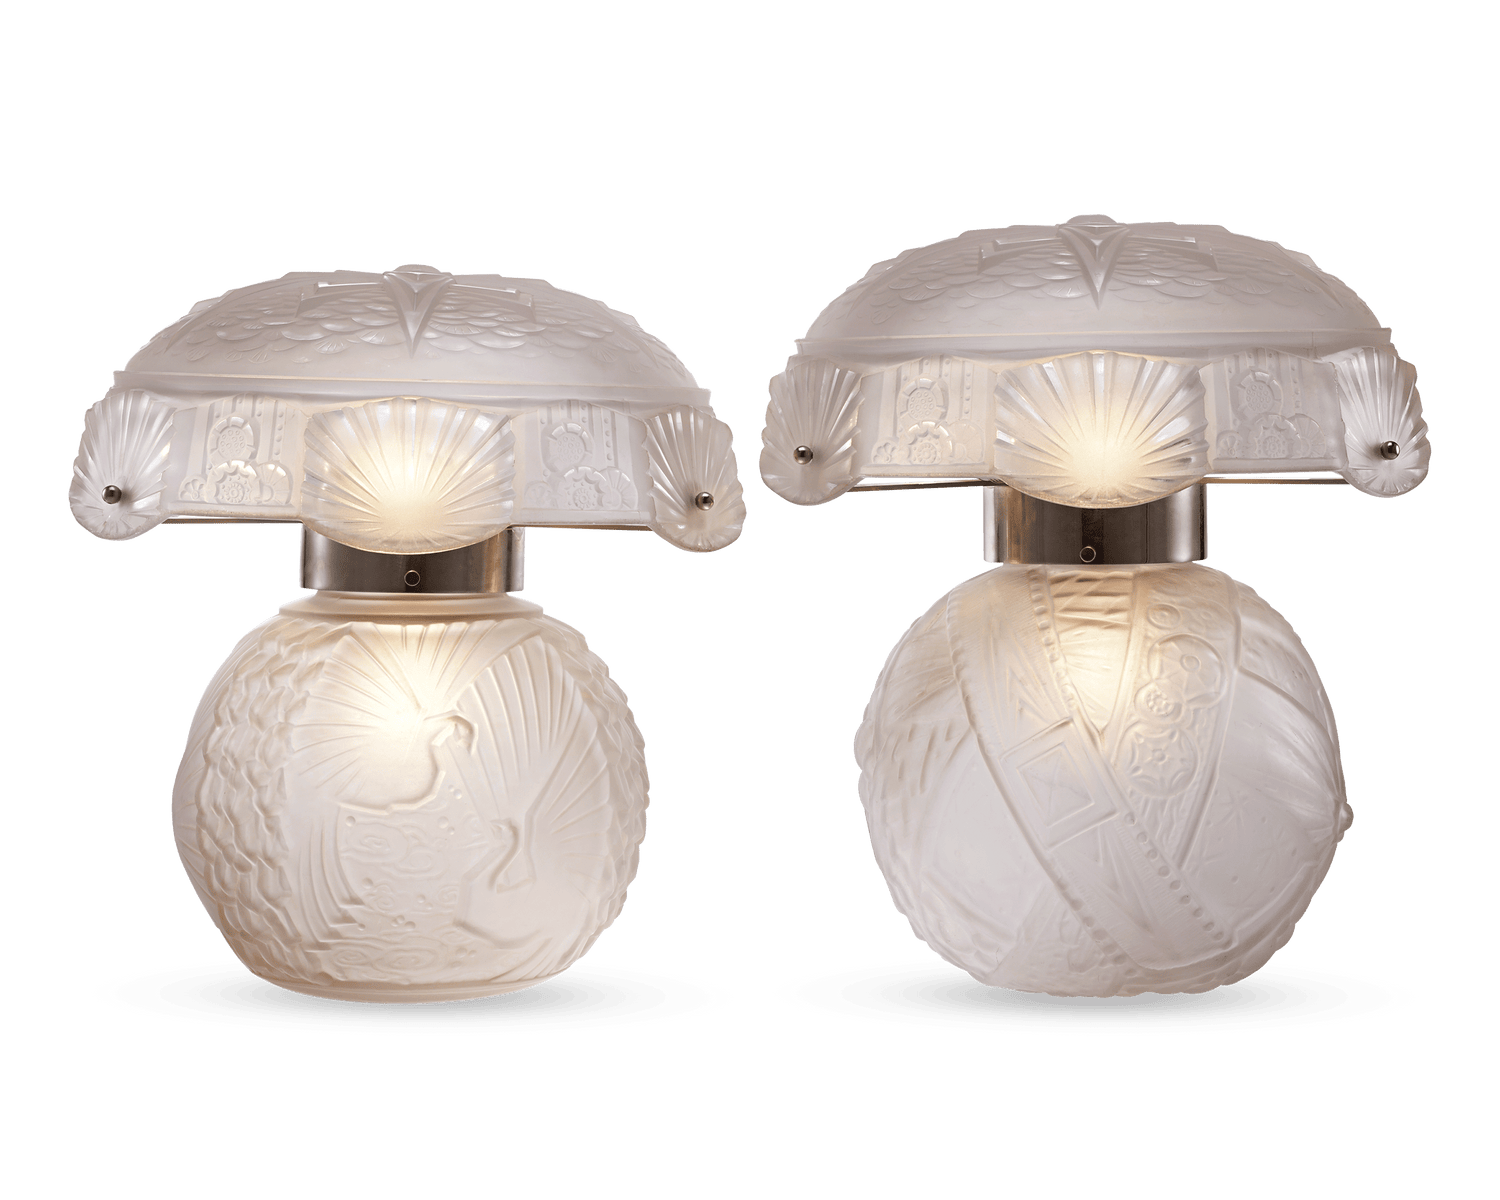 Pair of Glass Lamps by Muller Frères